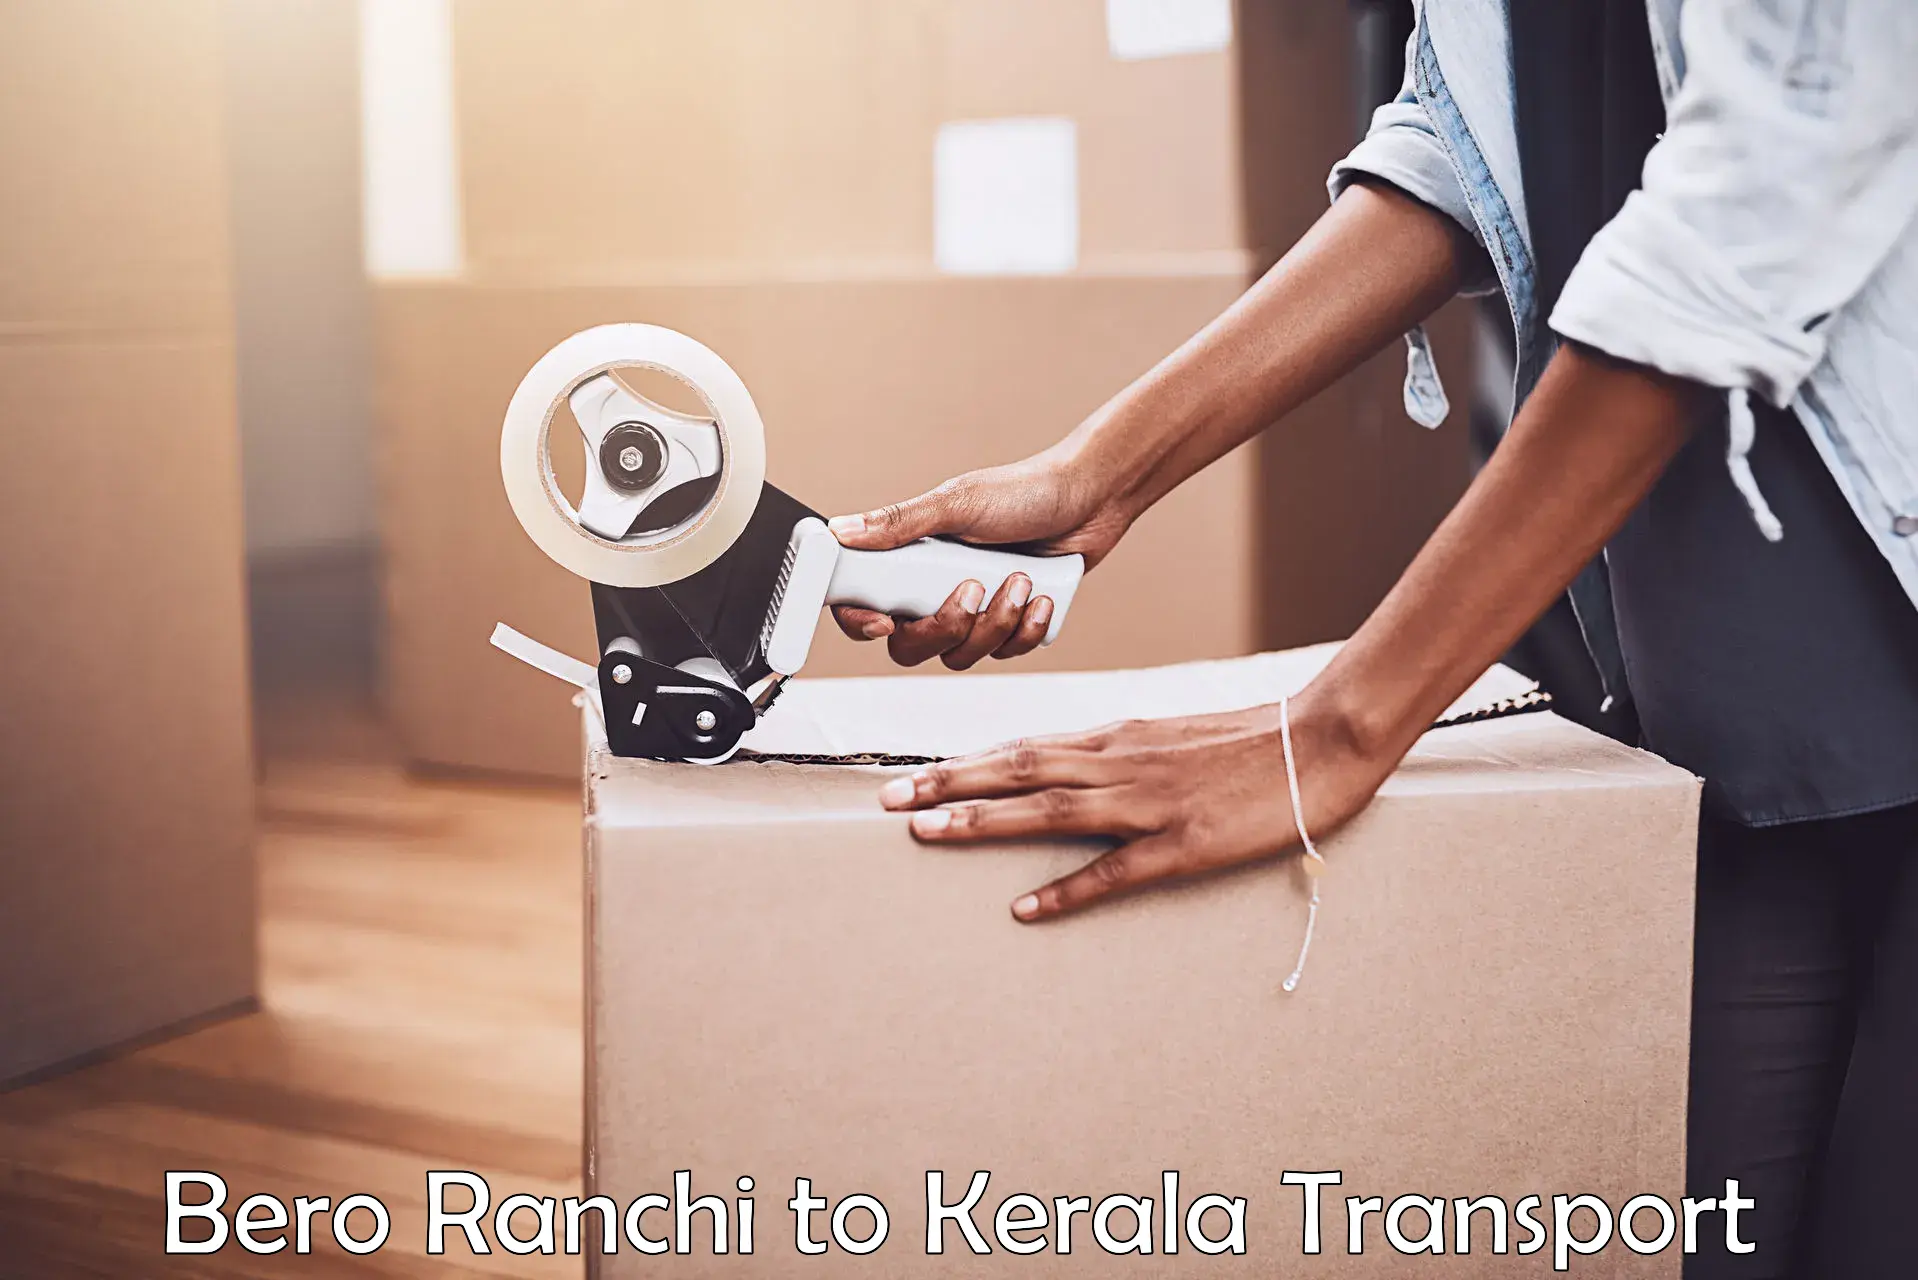 Material transport services Bero Ranchi to Thalassery